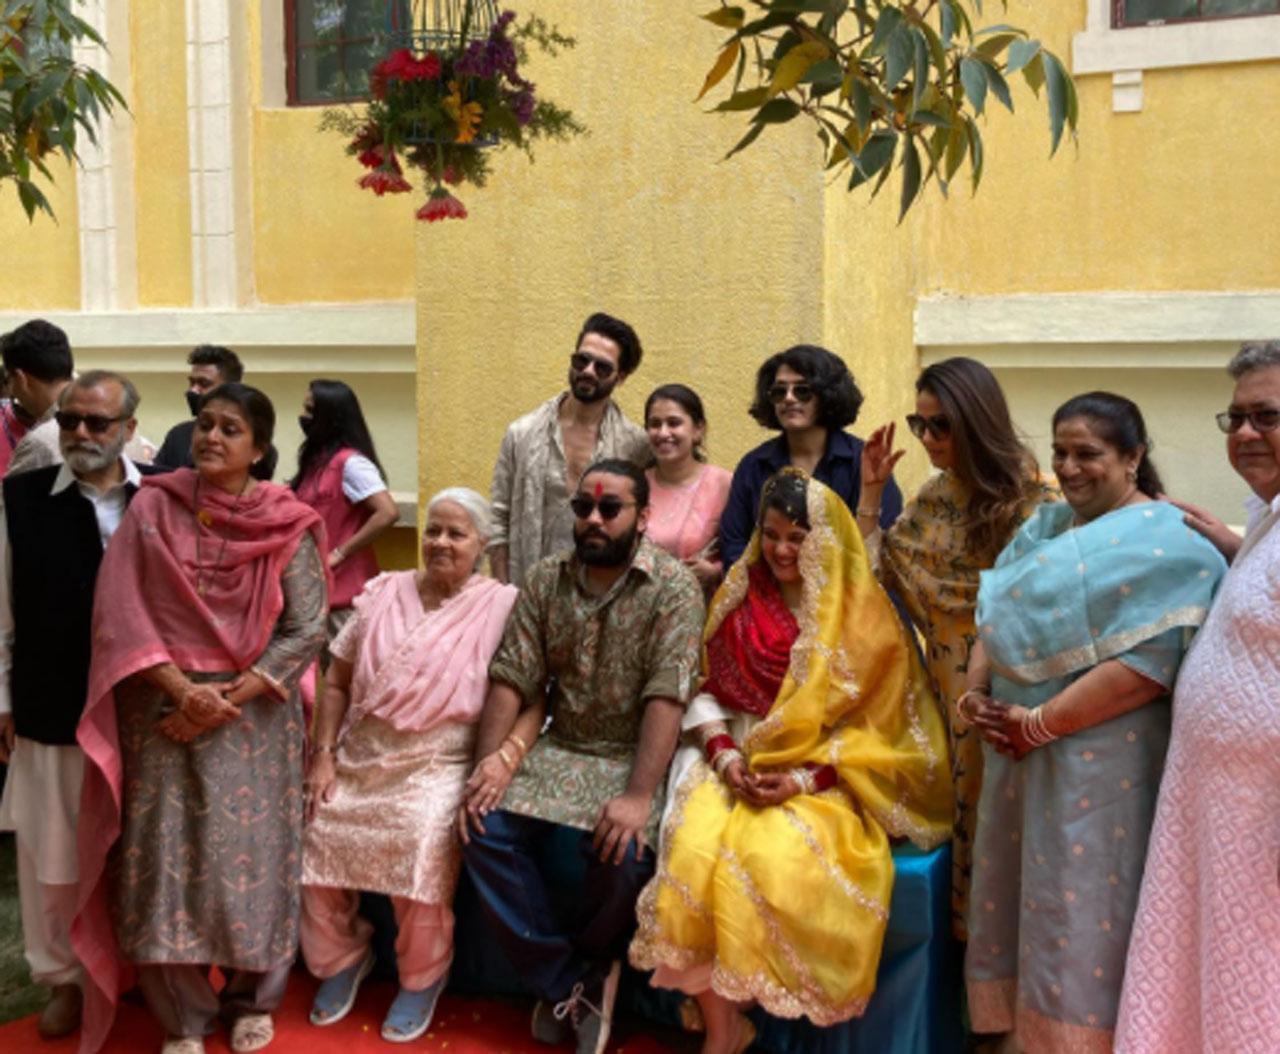 Shahid Kapoor, Naseeruddin Shah could be seen at the ceremony. Apart from Shahid Kapoor, Naseeruddin Shah, the other members of the the bride and the groom's family were also present that included Ratna Pathak Shah, Supriya Pathak, Imaad Shah, Vivaan Shah. 